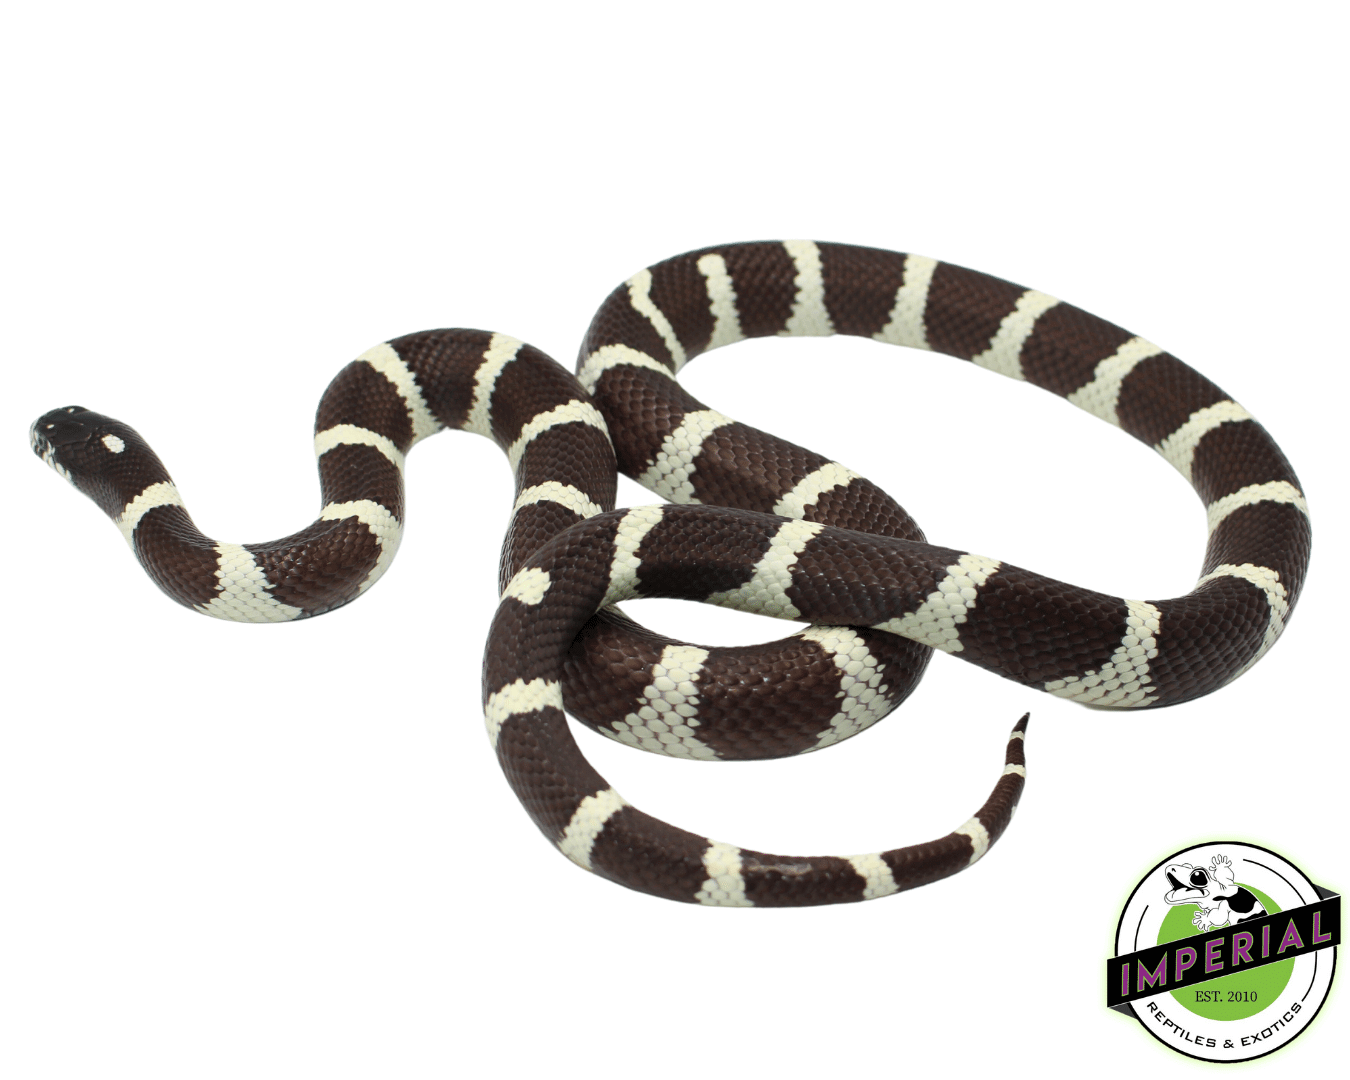 kingsnake for sale online at cheap prices, buy reptiles near me